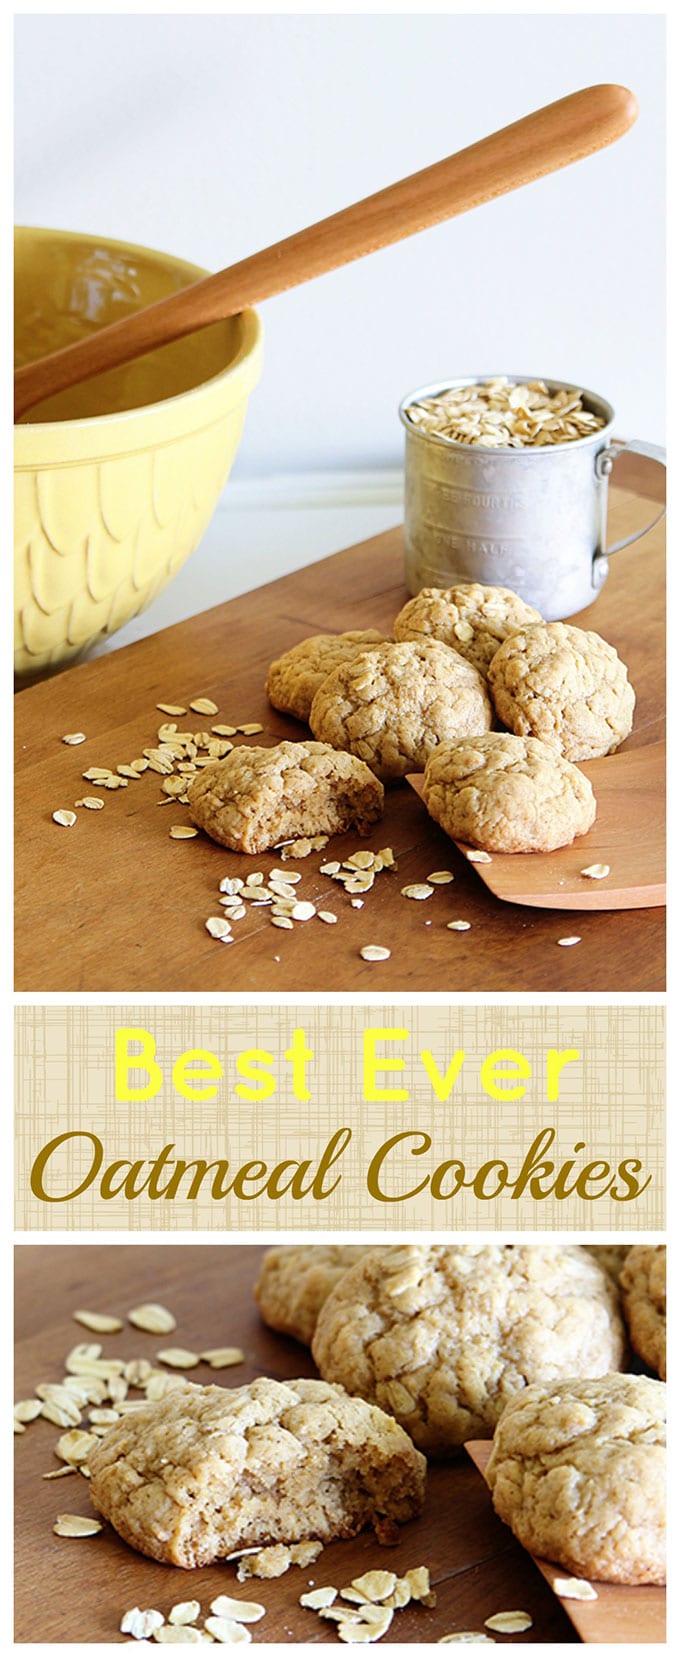 This is the best recipe for soft and chewy oatmeal cookies! Super easy to make and no electric mixers involved, so kids can help make them too.